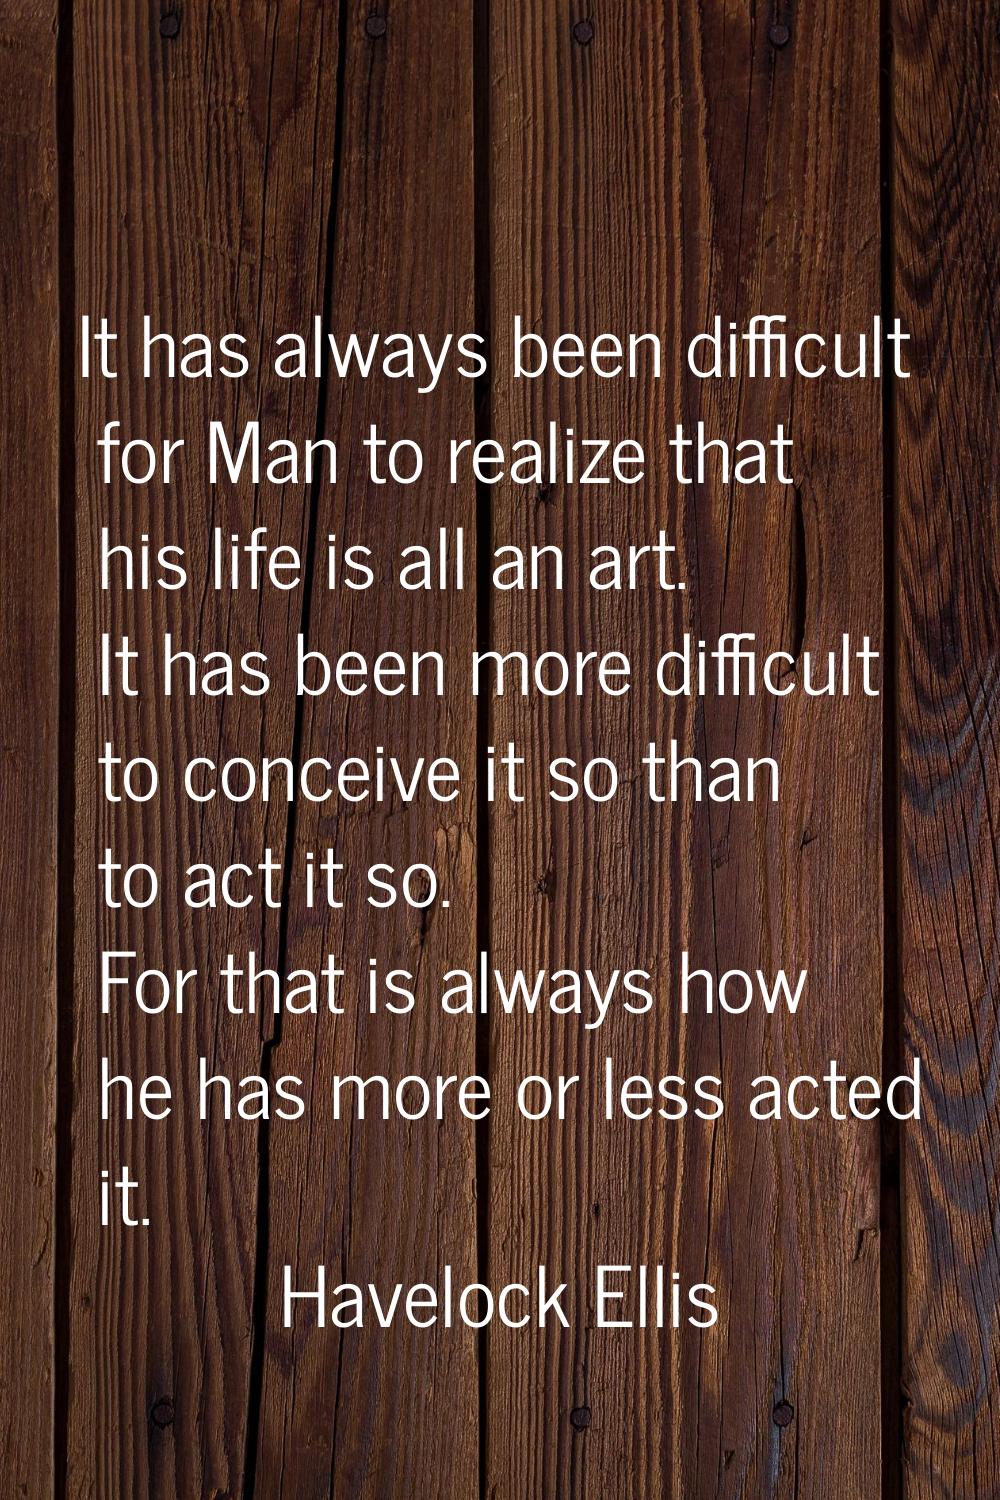 It has always been difficult for Man to realize that his life is all an art. It has been more diffi